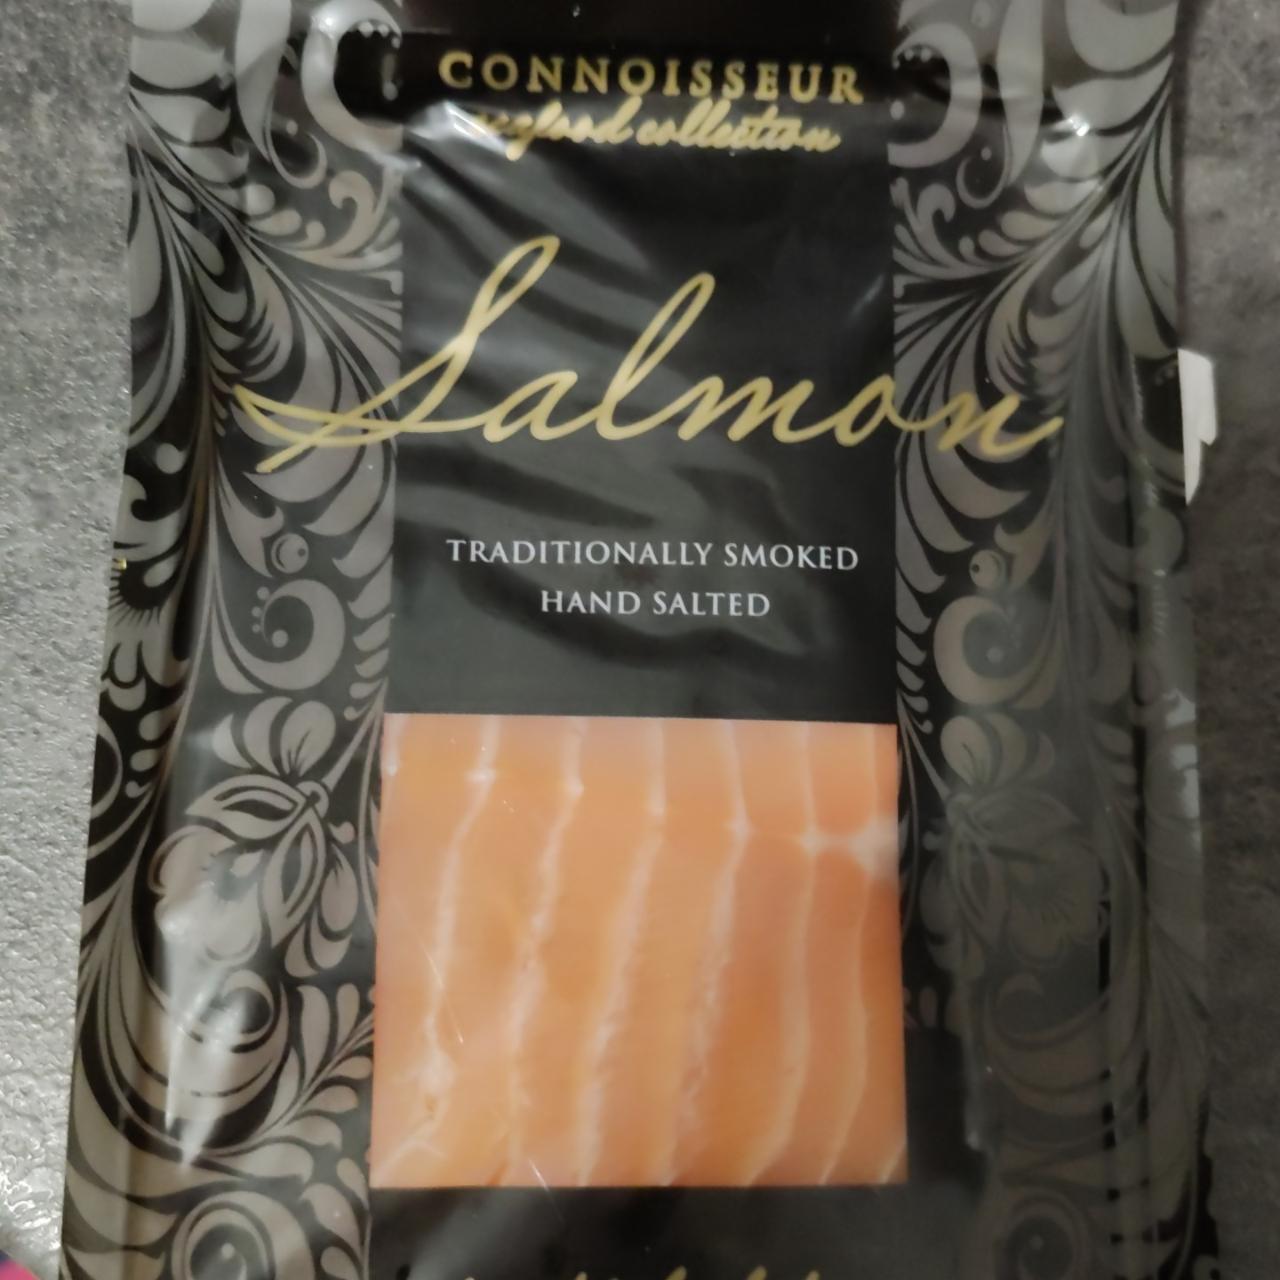 Fotografie - connoisseur seafood collection Salmon Traditionally smoked hand salted